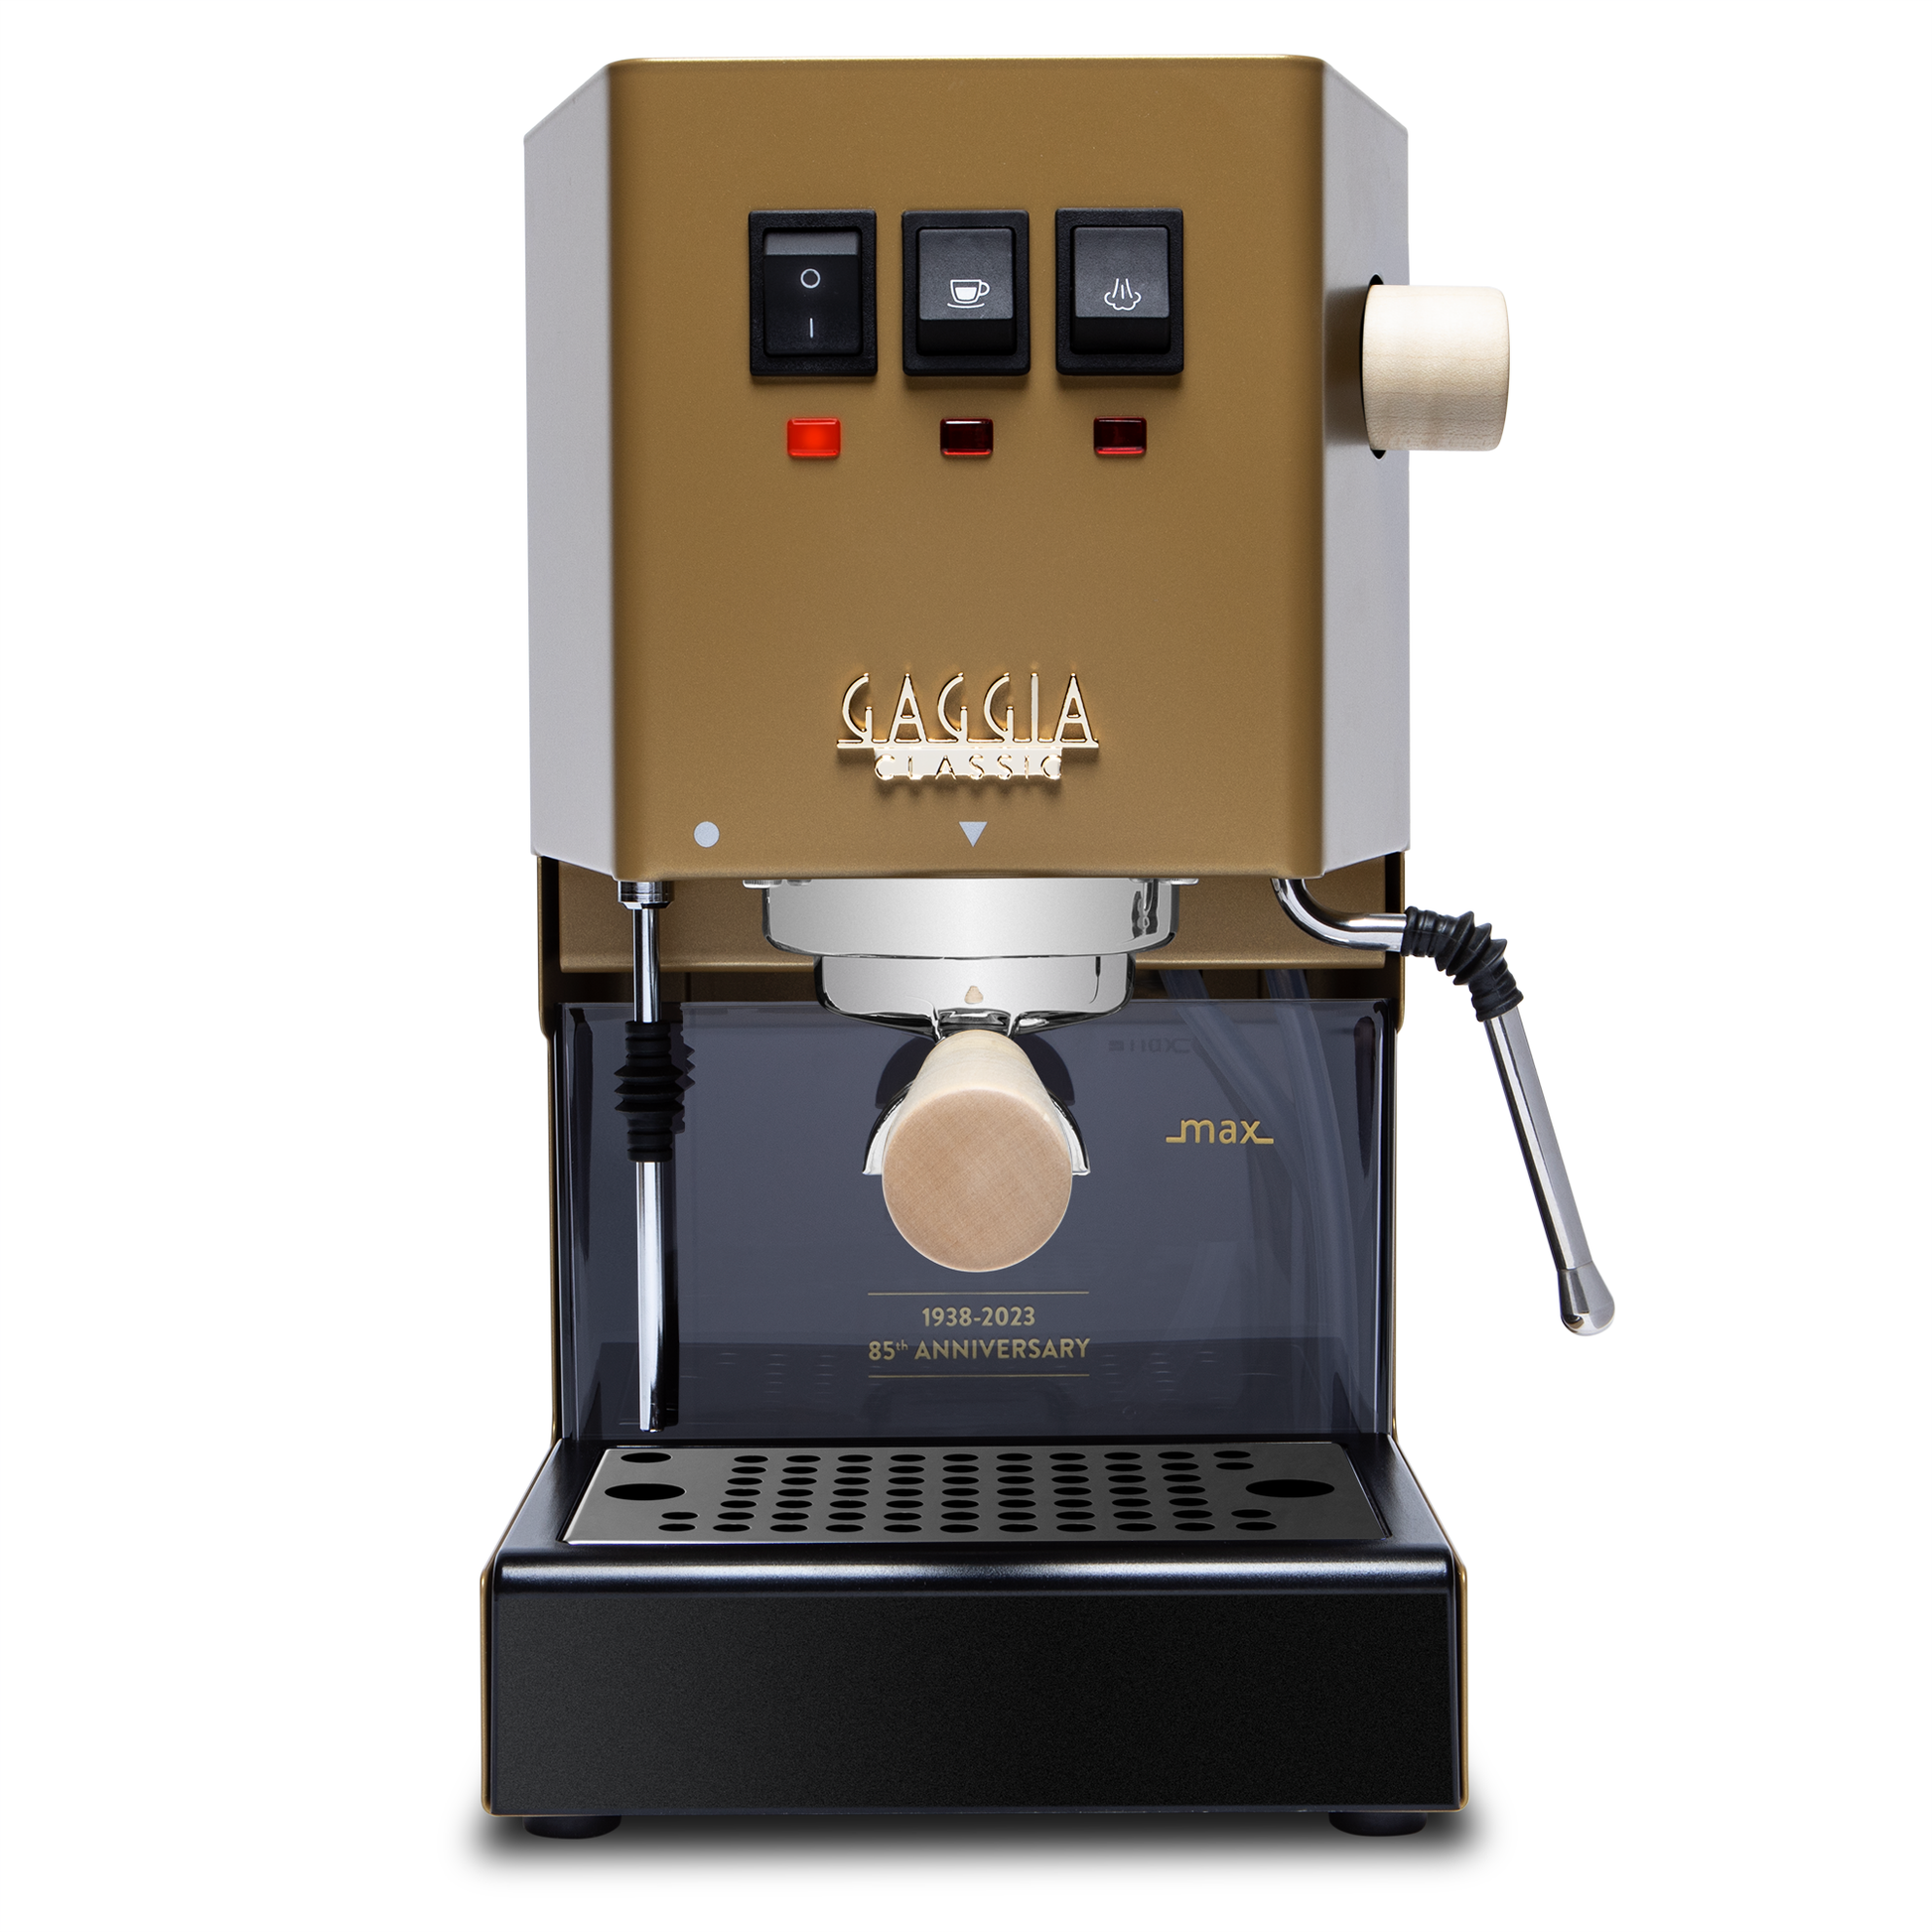 Coffee Tea Dispenser with Gold Accents 55 Cups, ABPR